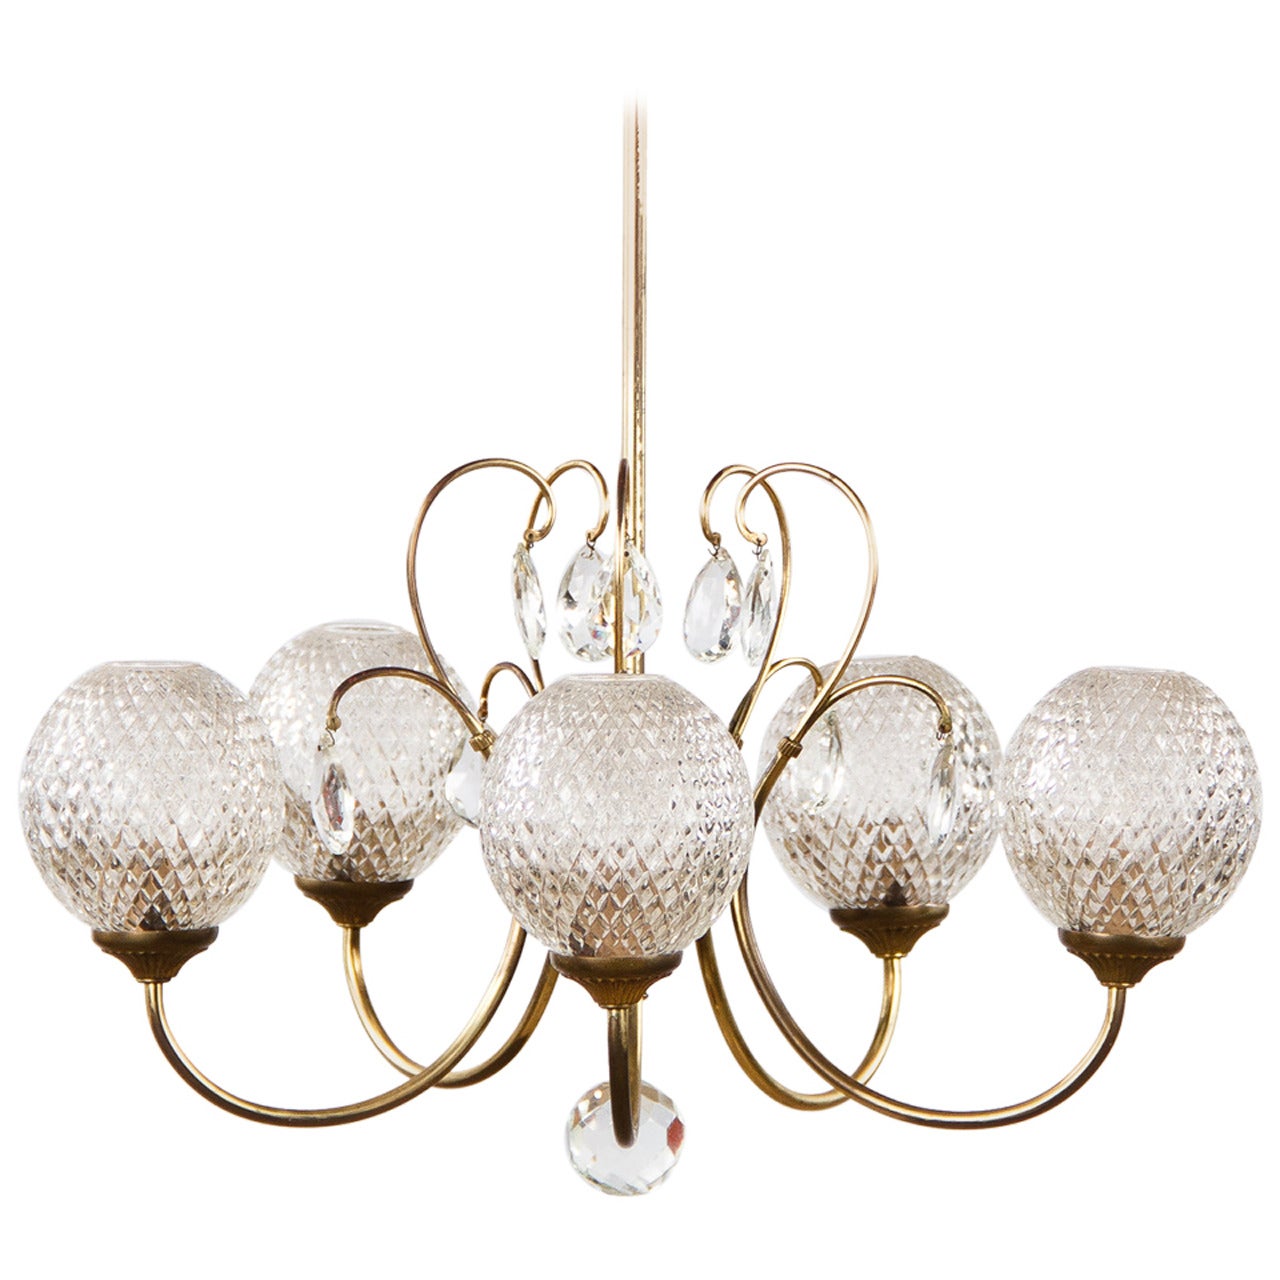 Vintage French Brass Chandelier with Glass Globes